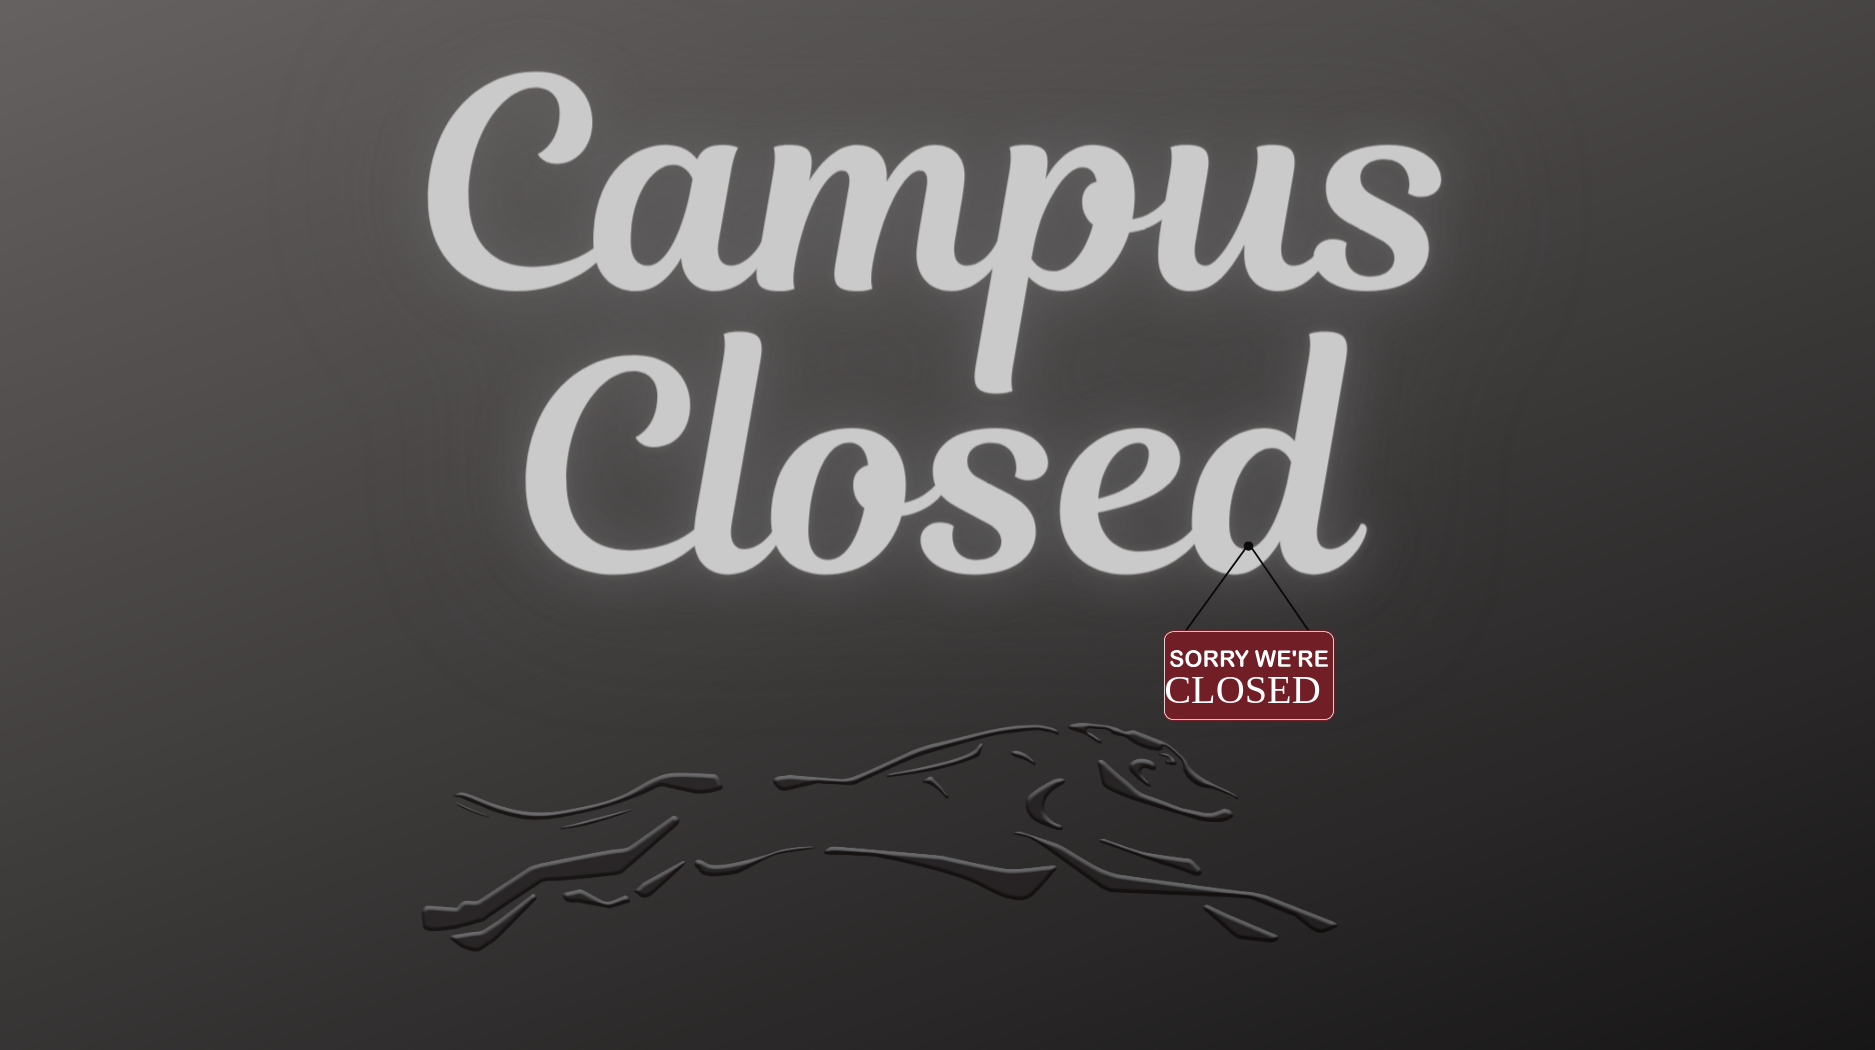 Graphic Saying Campus Closed with a "Sorry we are closed" sign dangling from it and the FSCC Greyhound logo at the bottom